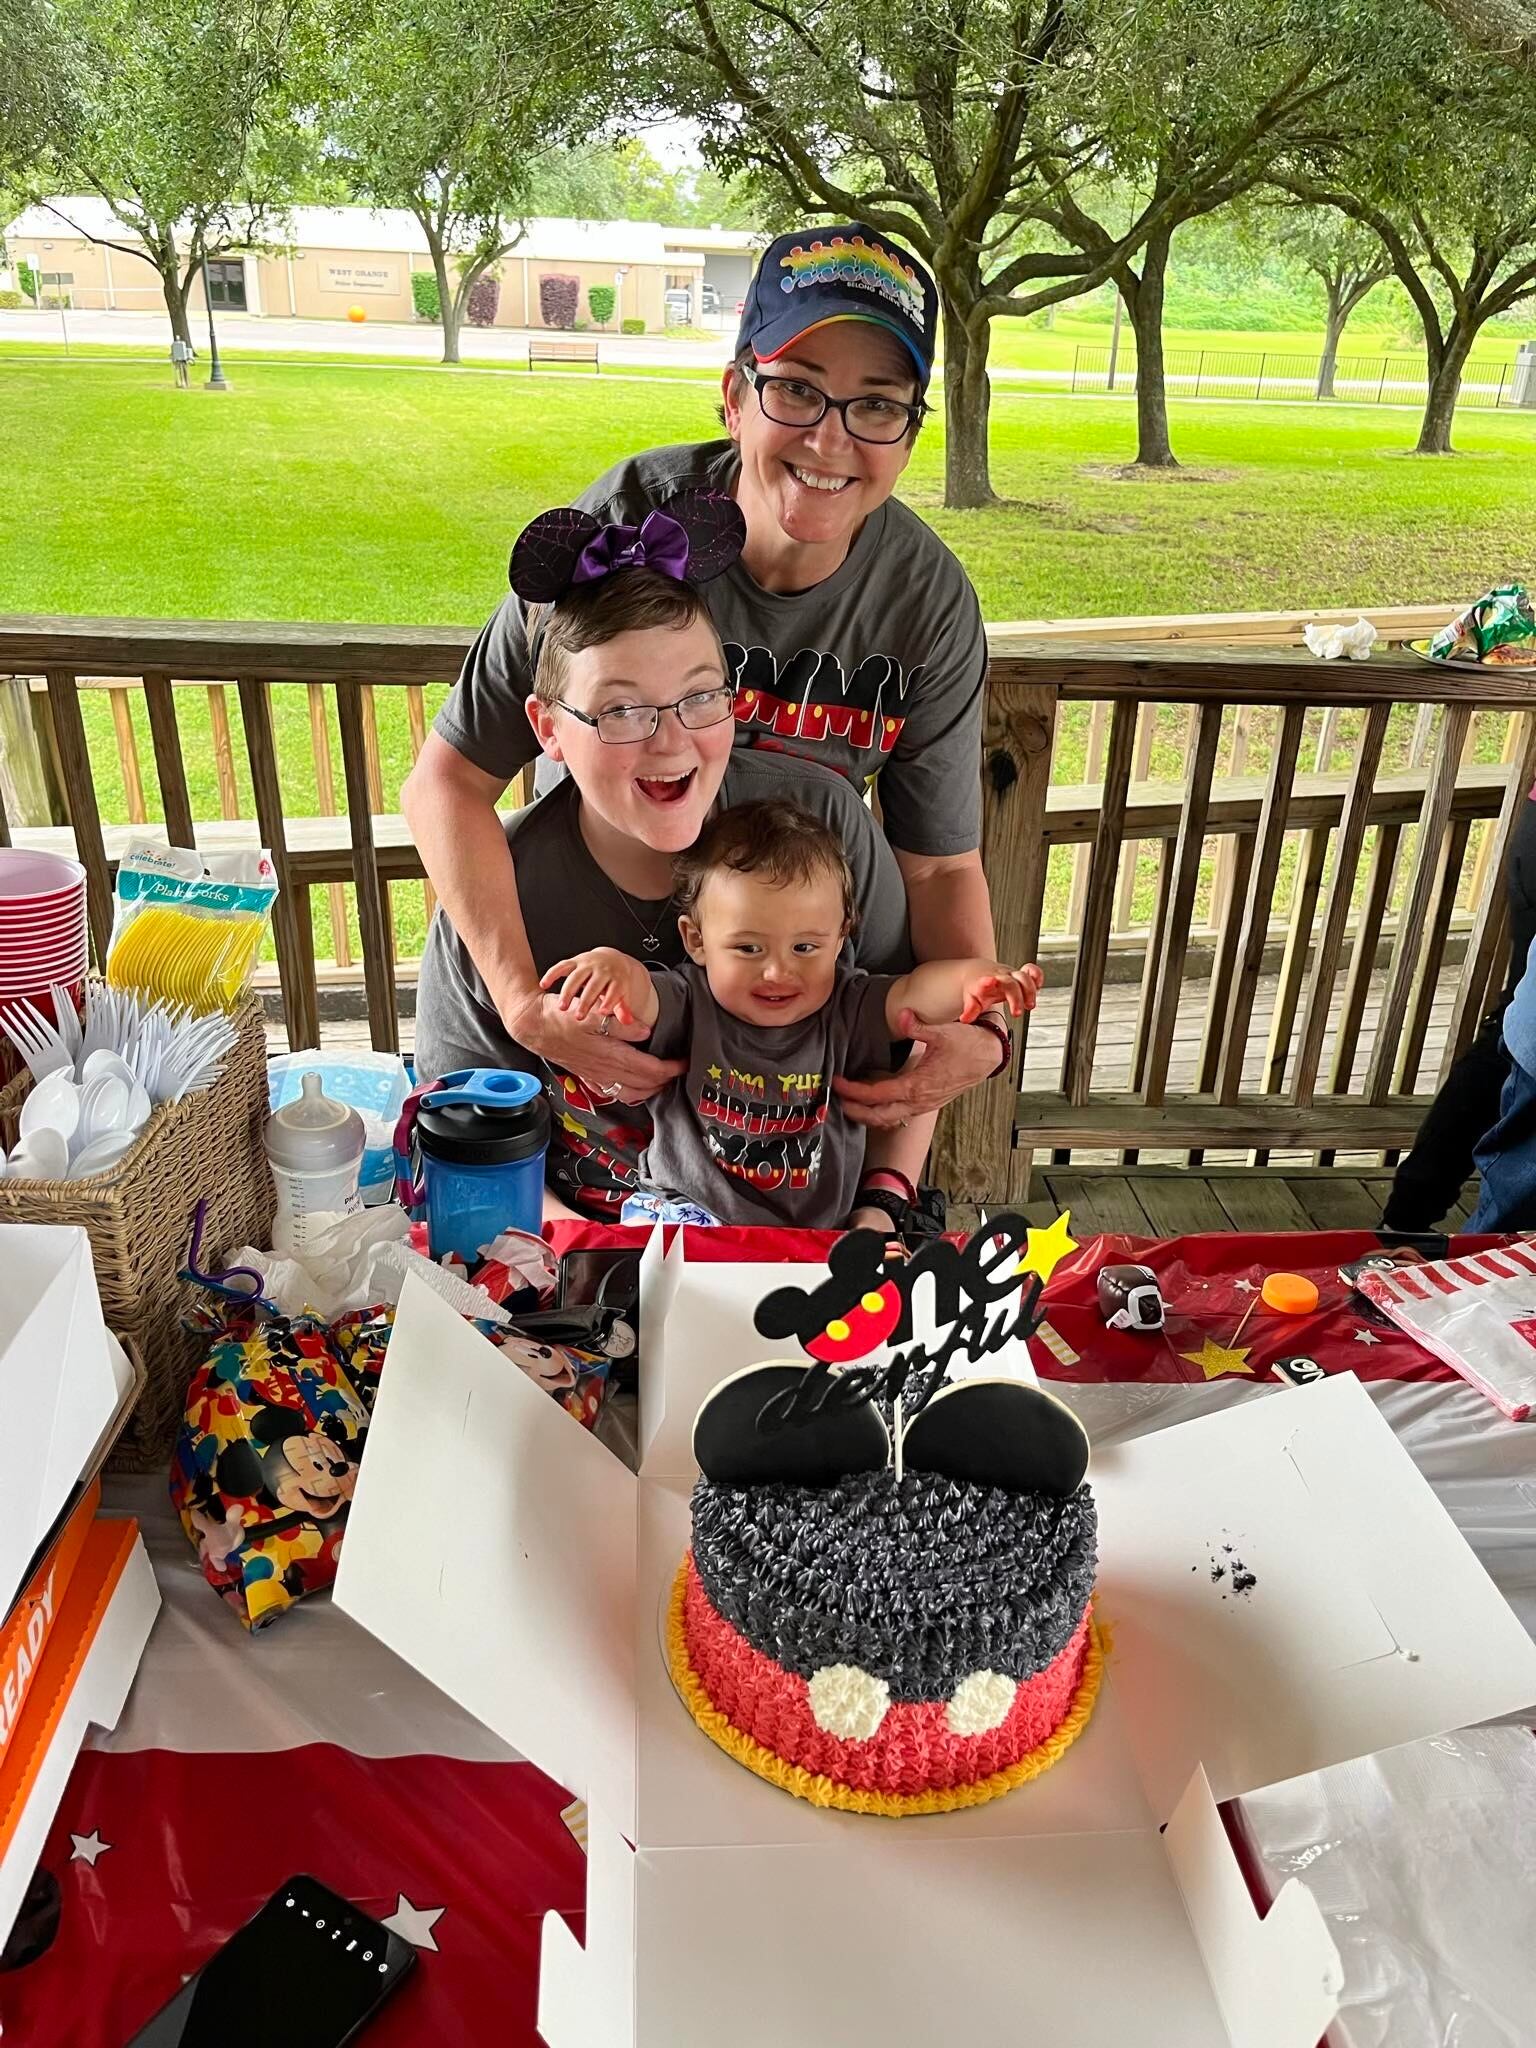 (Janette Petersen) Janette Petersen, middle, and wife Tammy celebrate their son's first birthday. Petersen's membership was withdrawn earlier this year after she refused to seek a divorce.